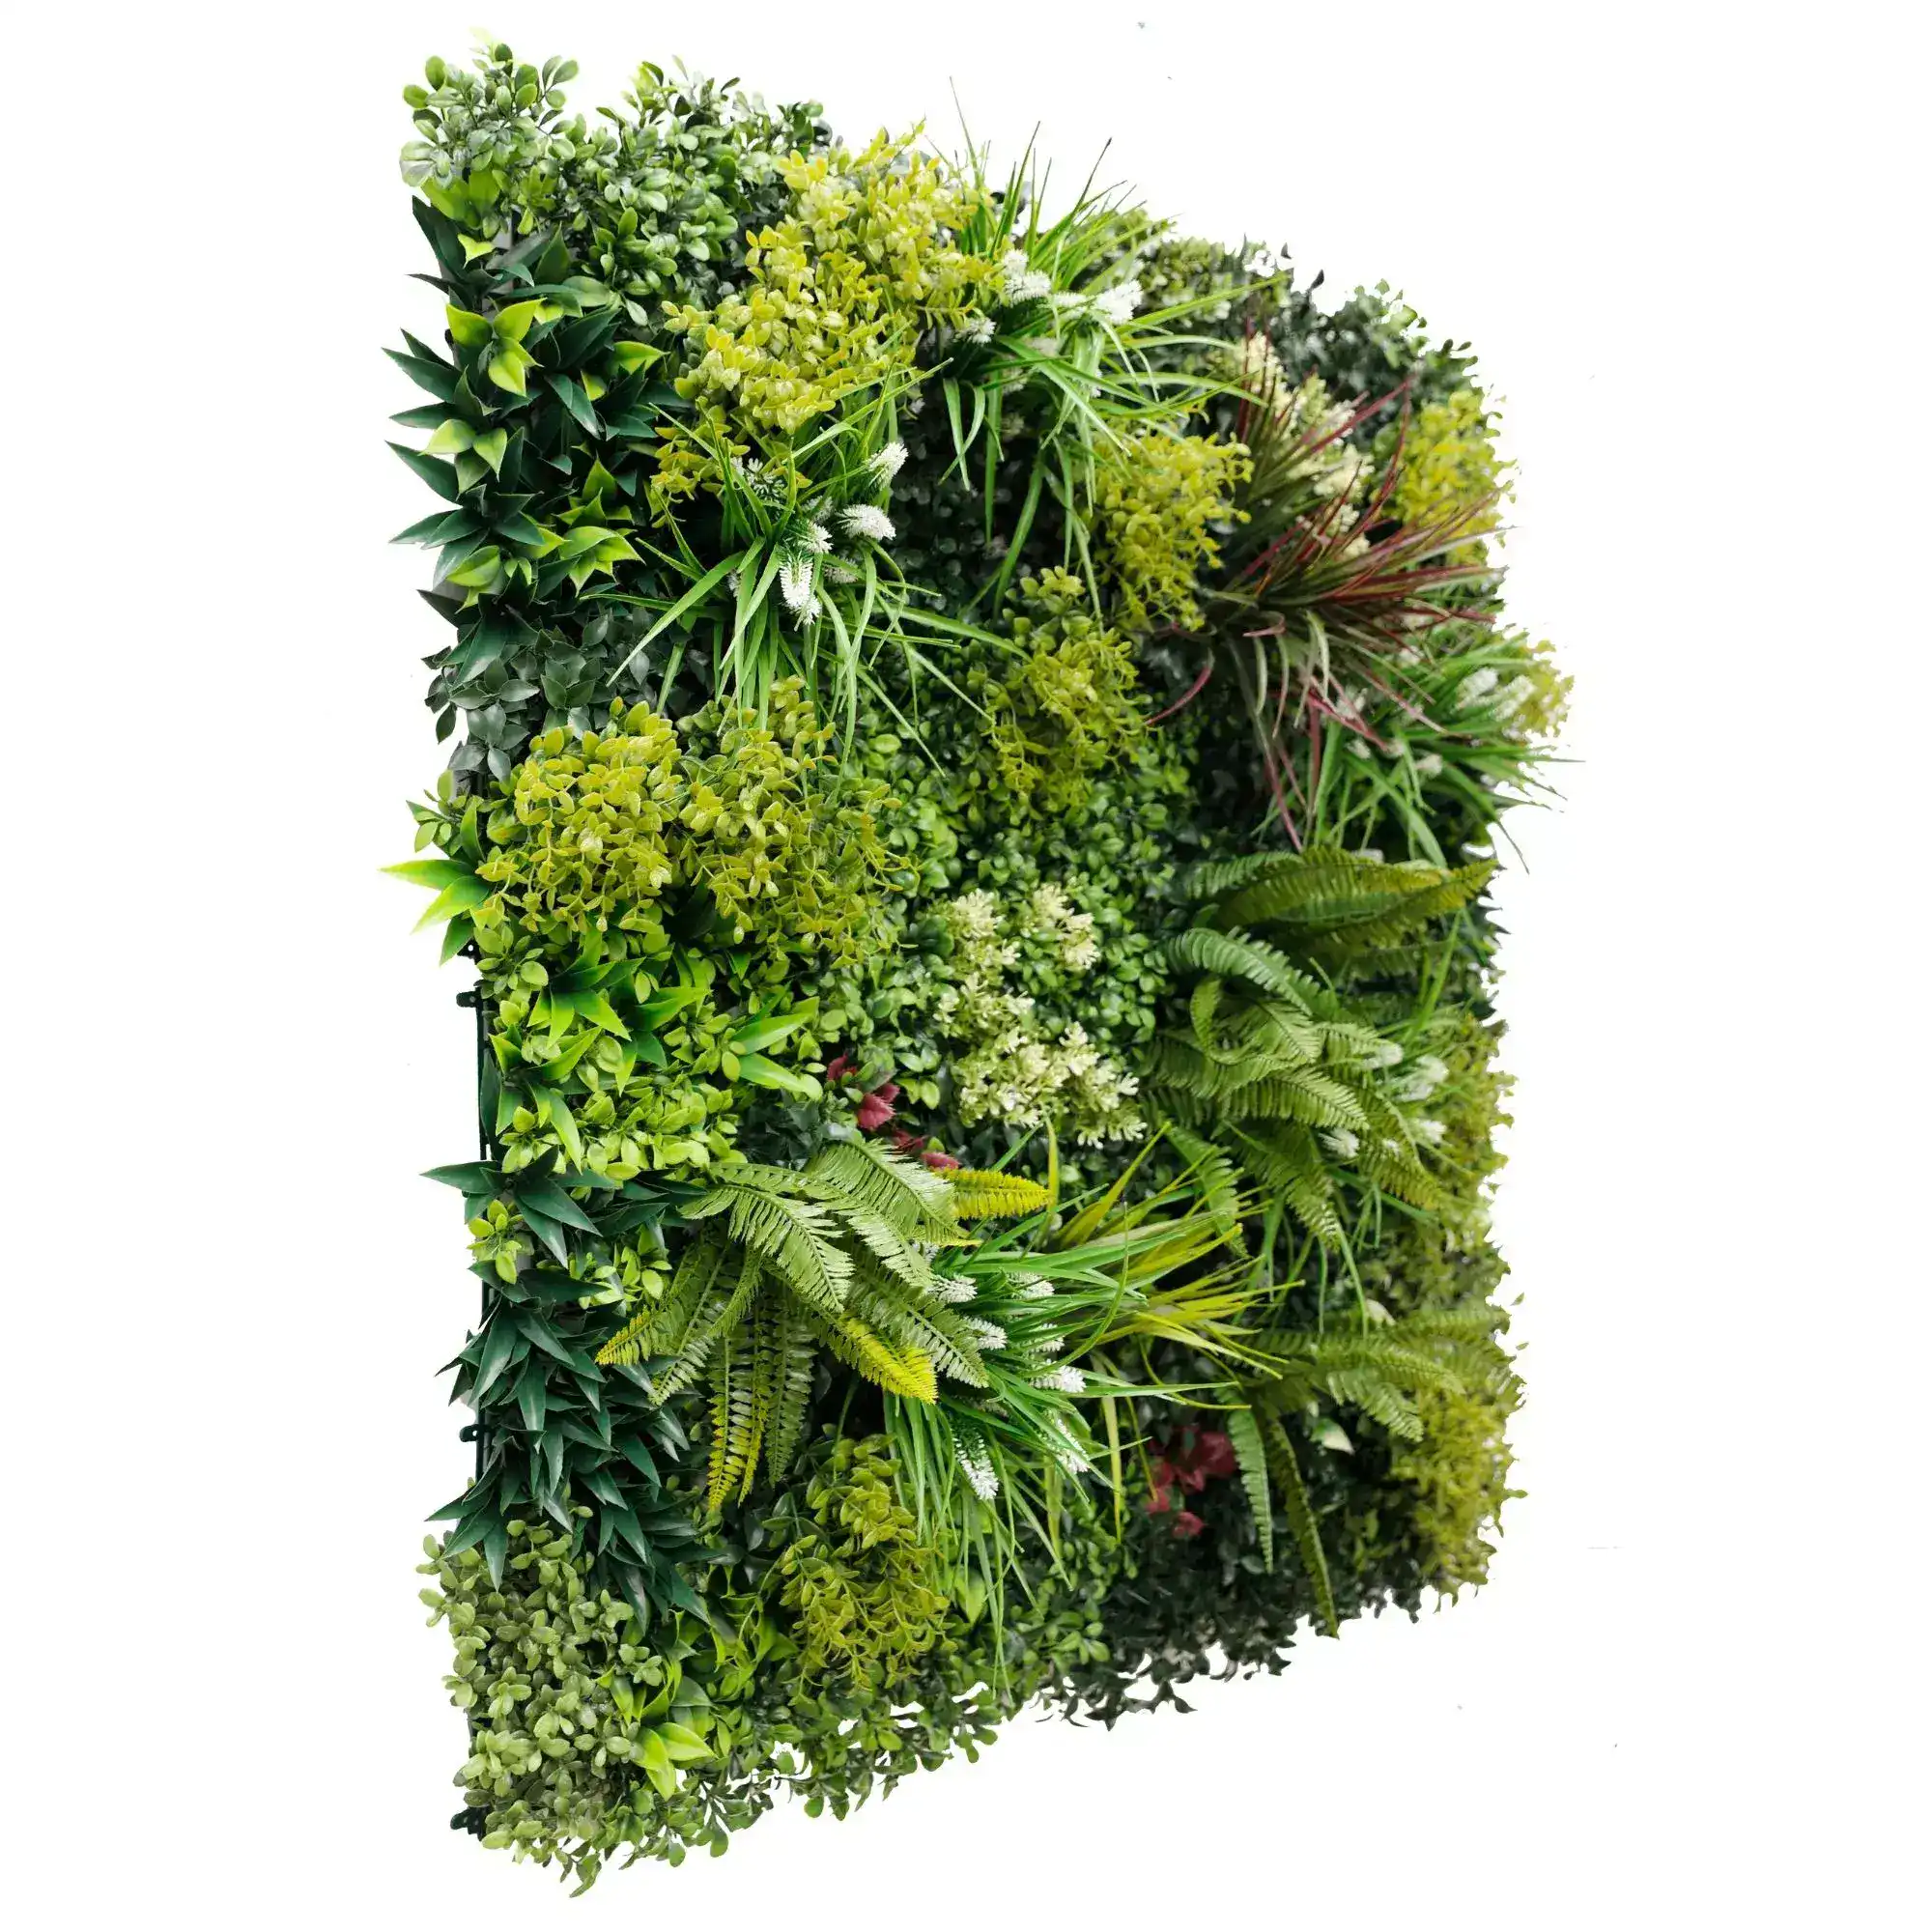 Realistic artificial vertical garden with evergreen style foliage - side view